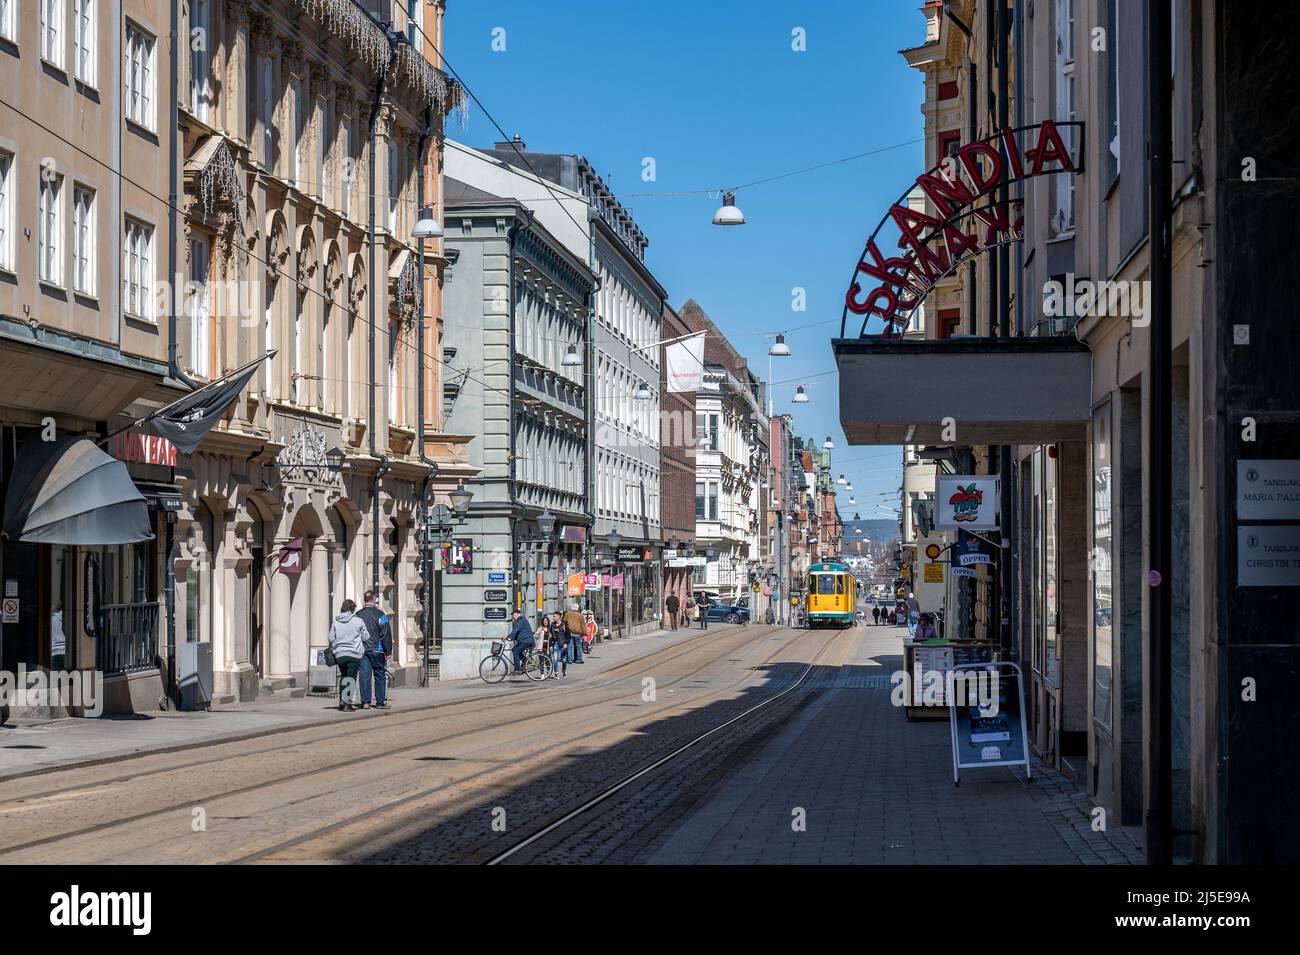 Tram on Drottningatan in the city center of Norrkoping, Sweden. The yellow trams are iconic for Norrkoping. Stock Photo